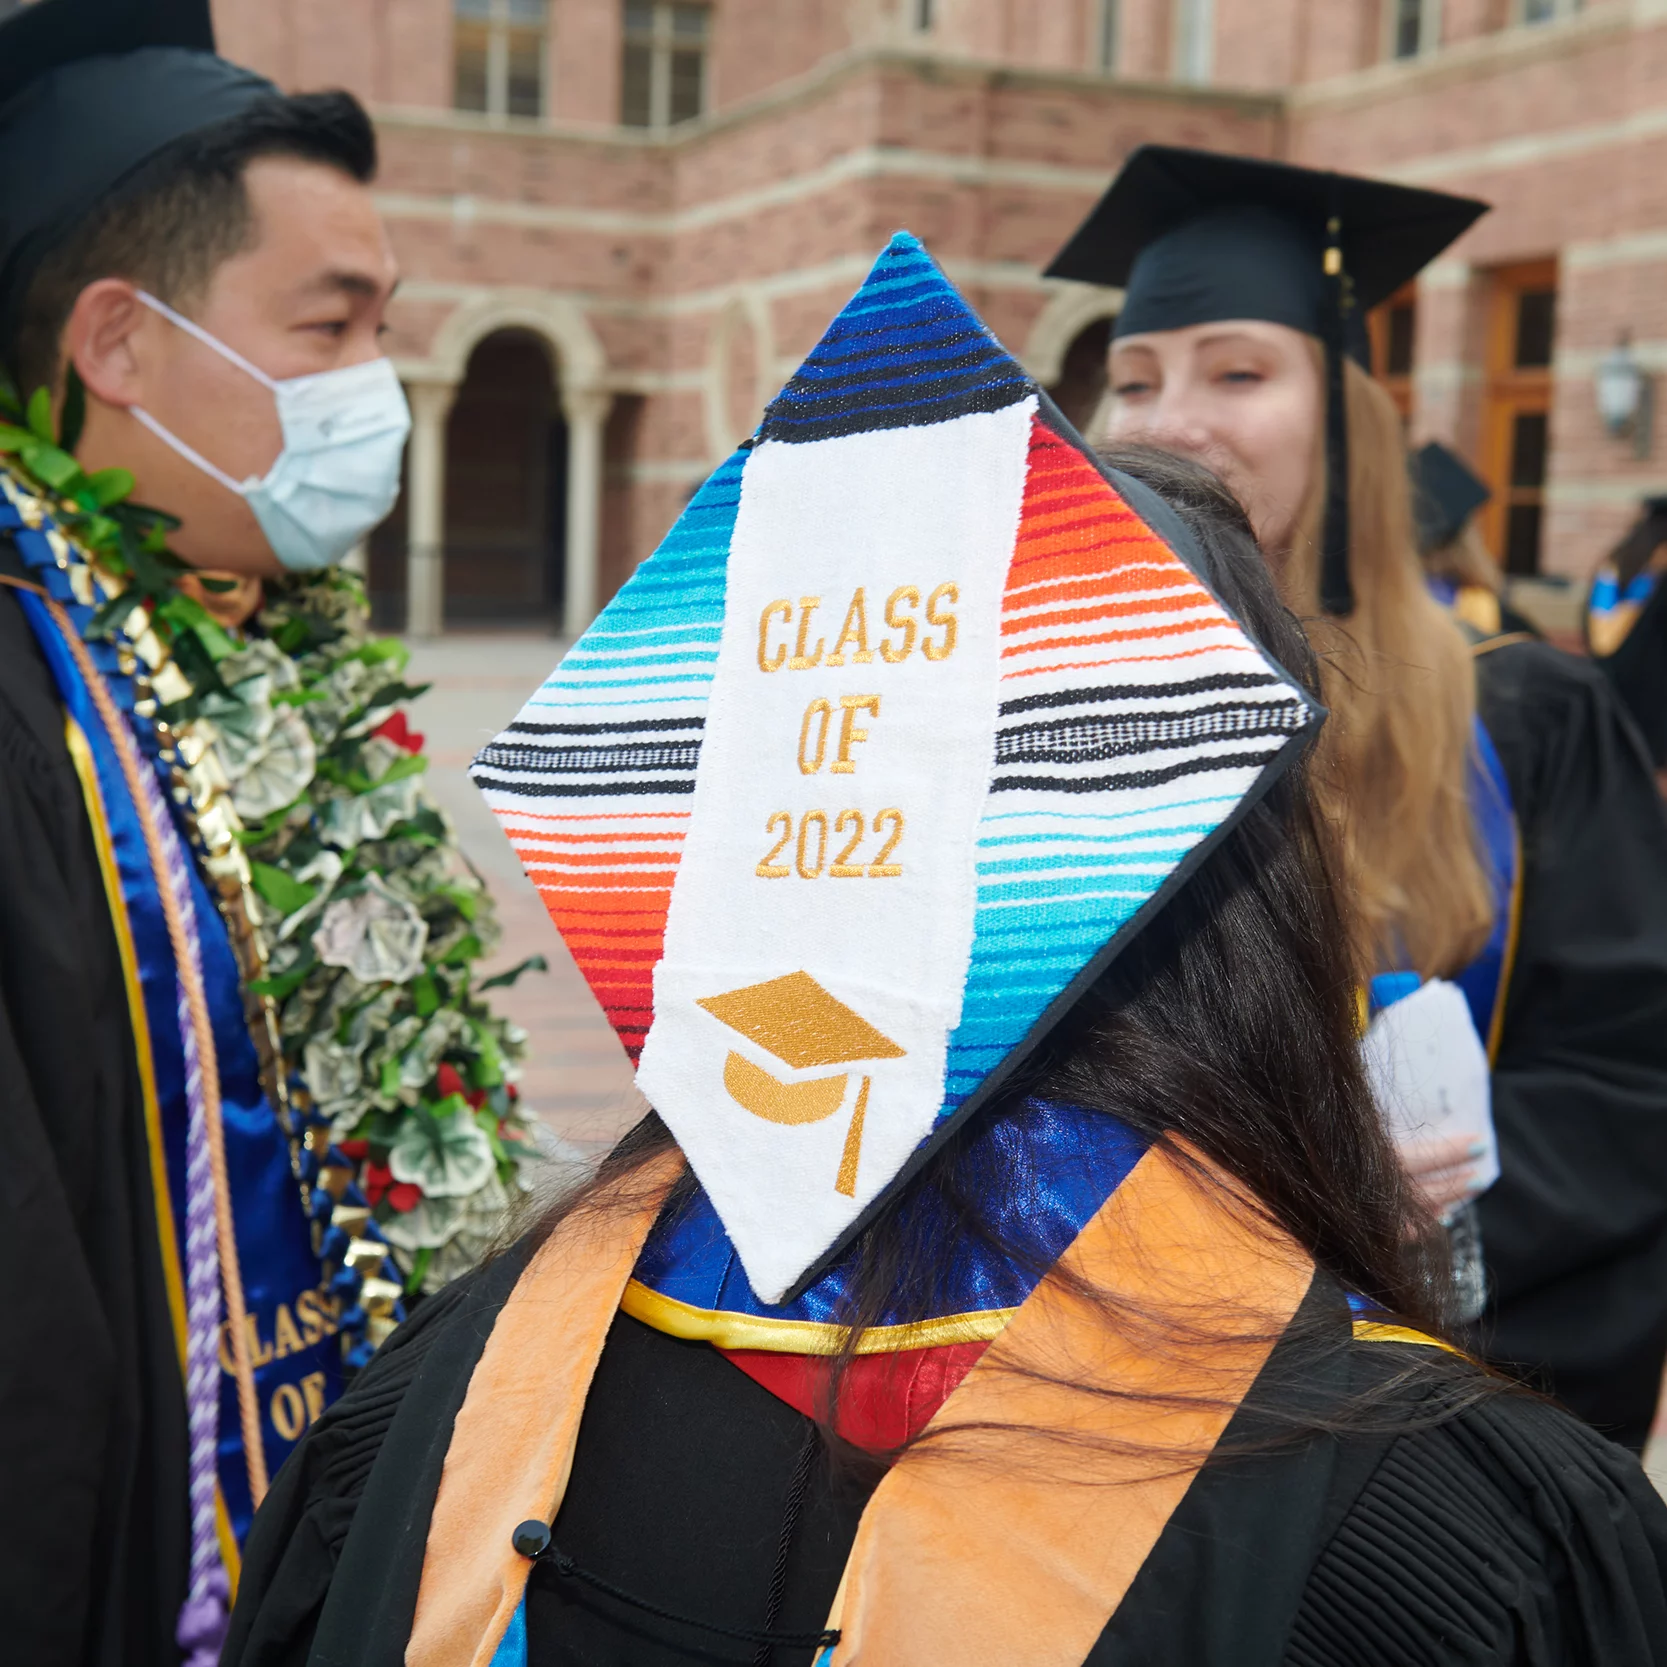 A decorated cap with the text Class of 2022